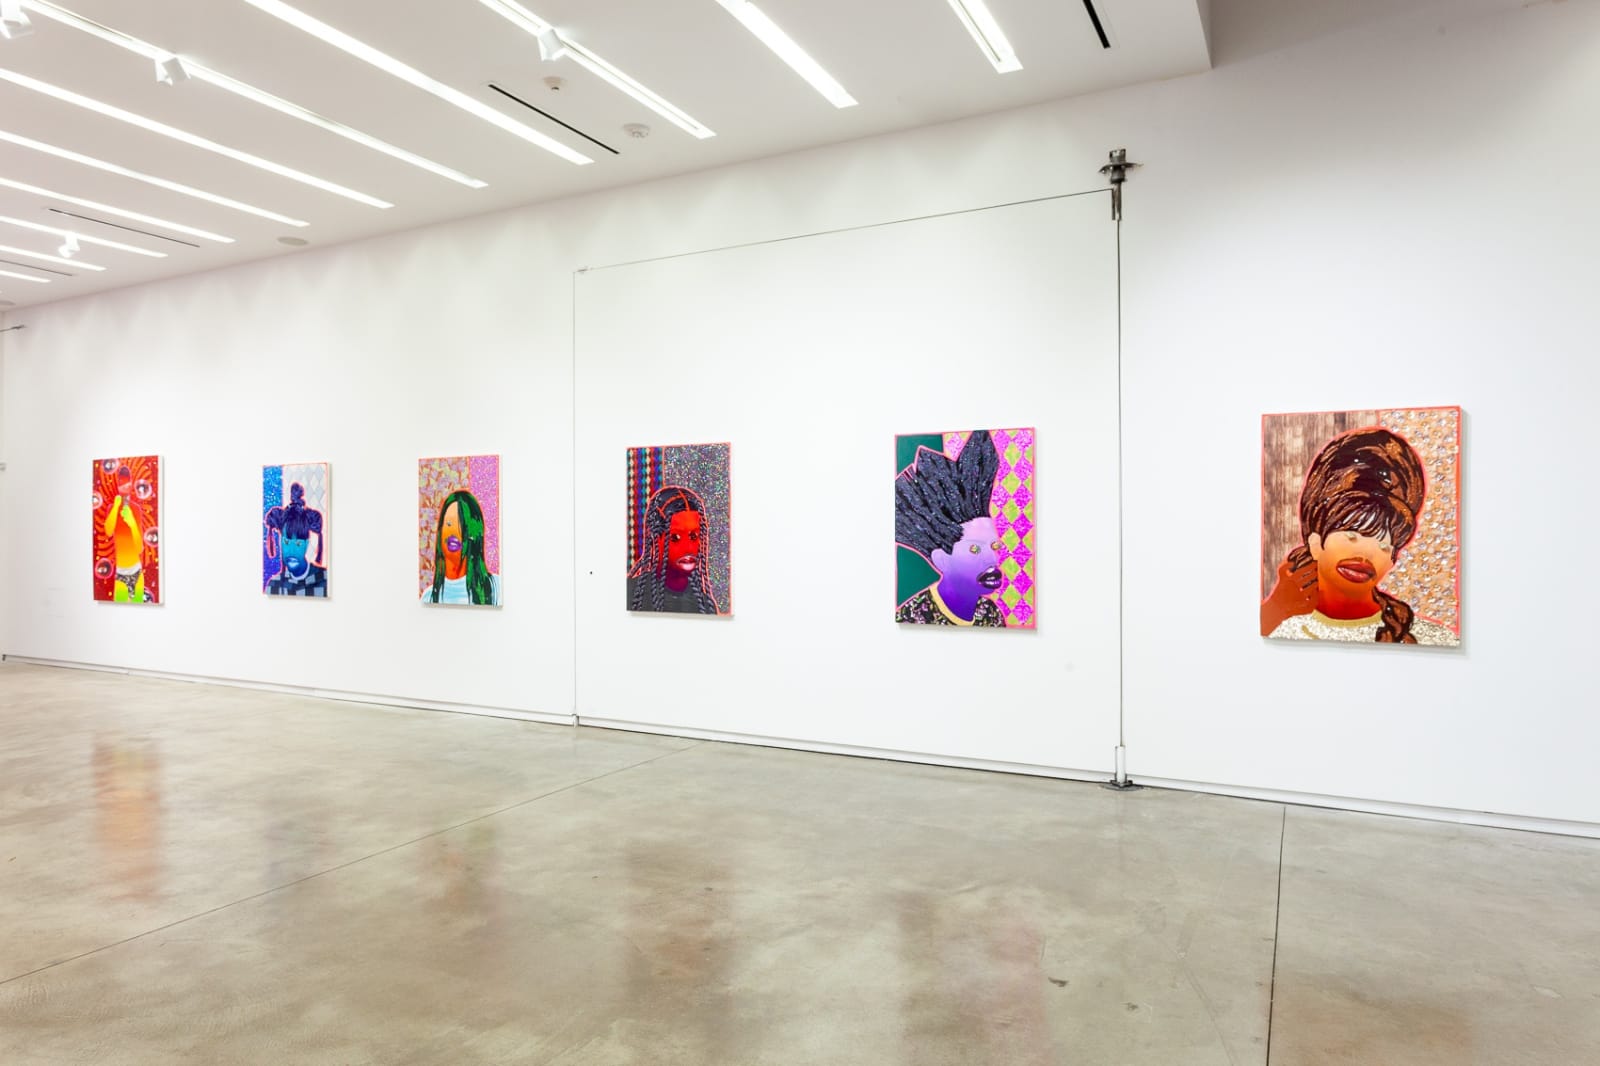 Devan Shimoyama: A Counterfeit Gift Wrapped in Fire